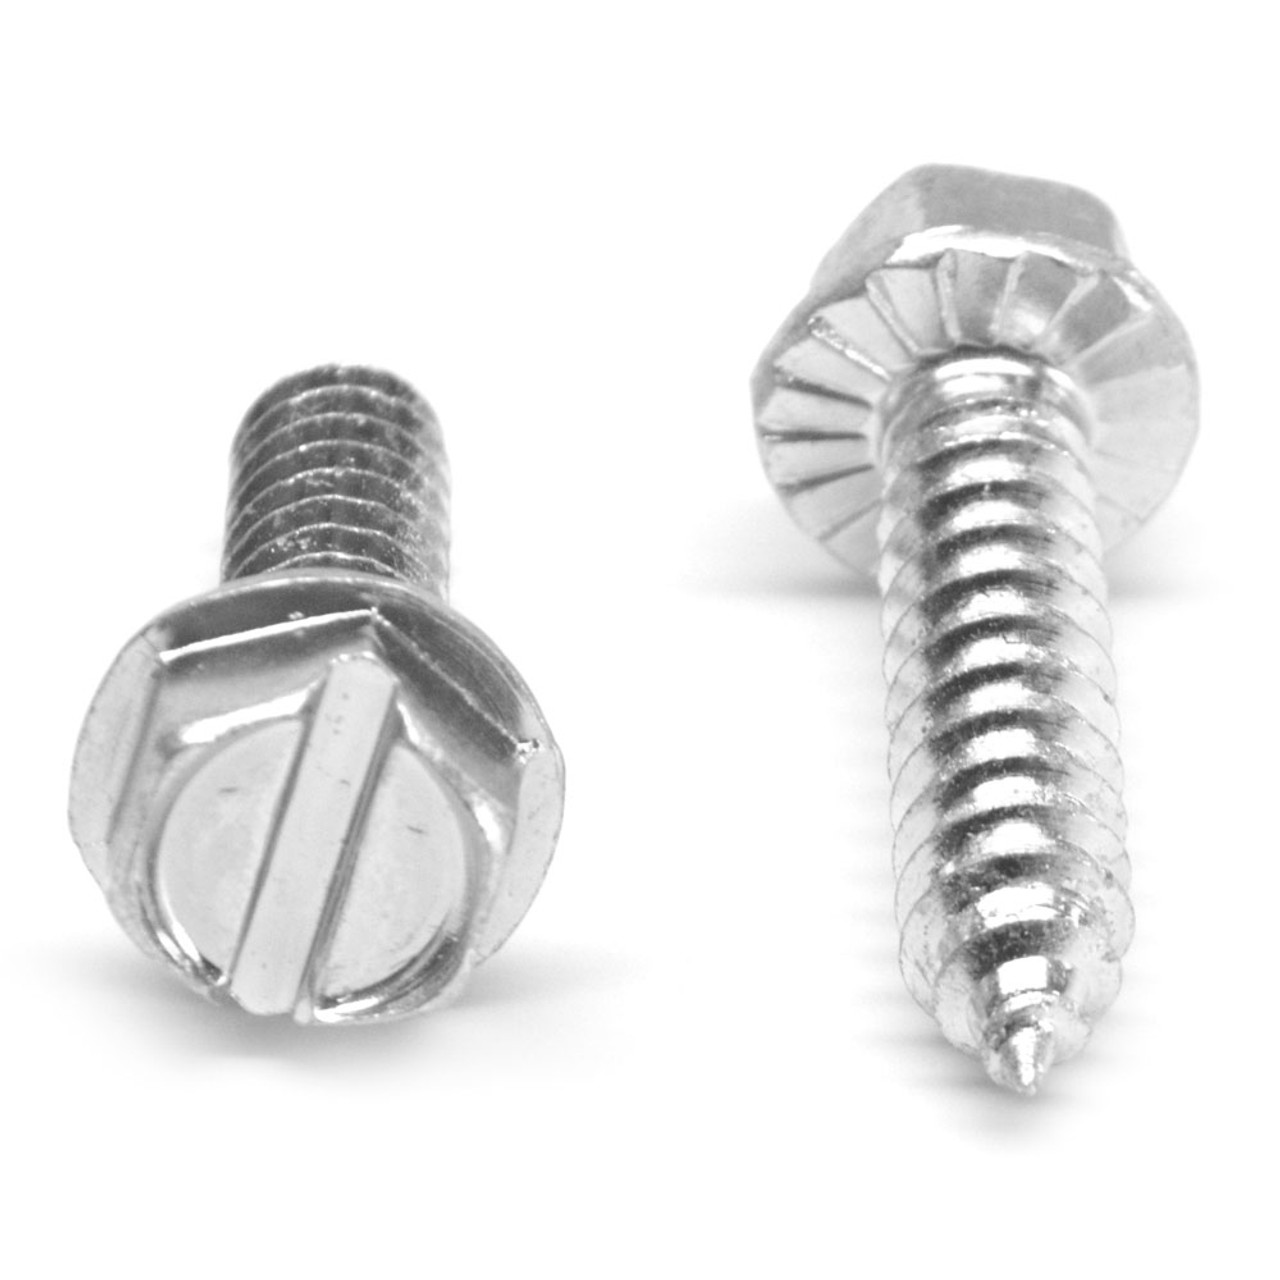 1/4-14 x 1 1/4 Sheet Metal Screw Slotted Hex Washer Head with Serration Type AB Stainless Steel 18-8